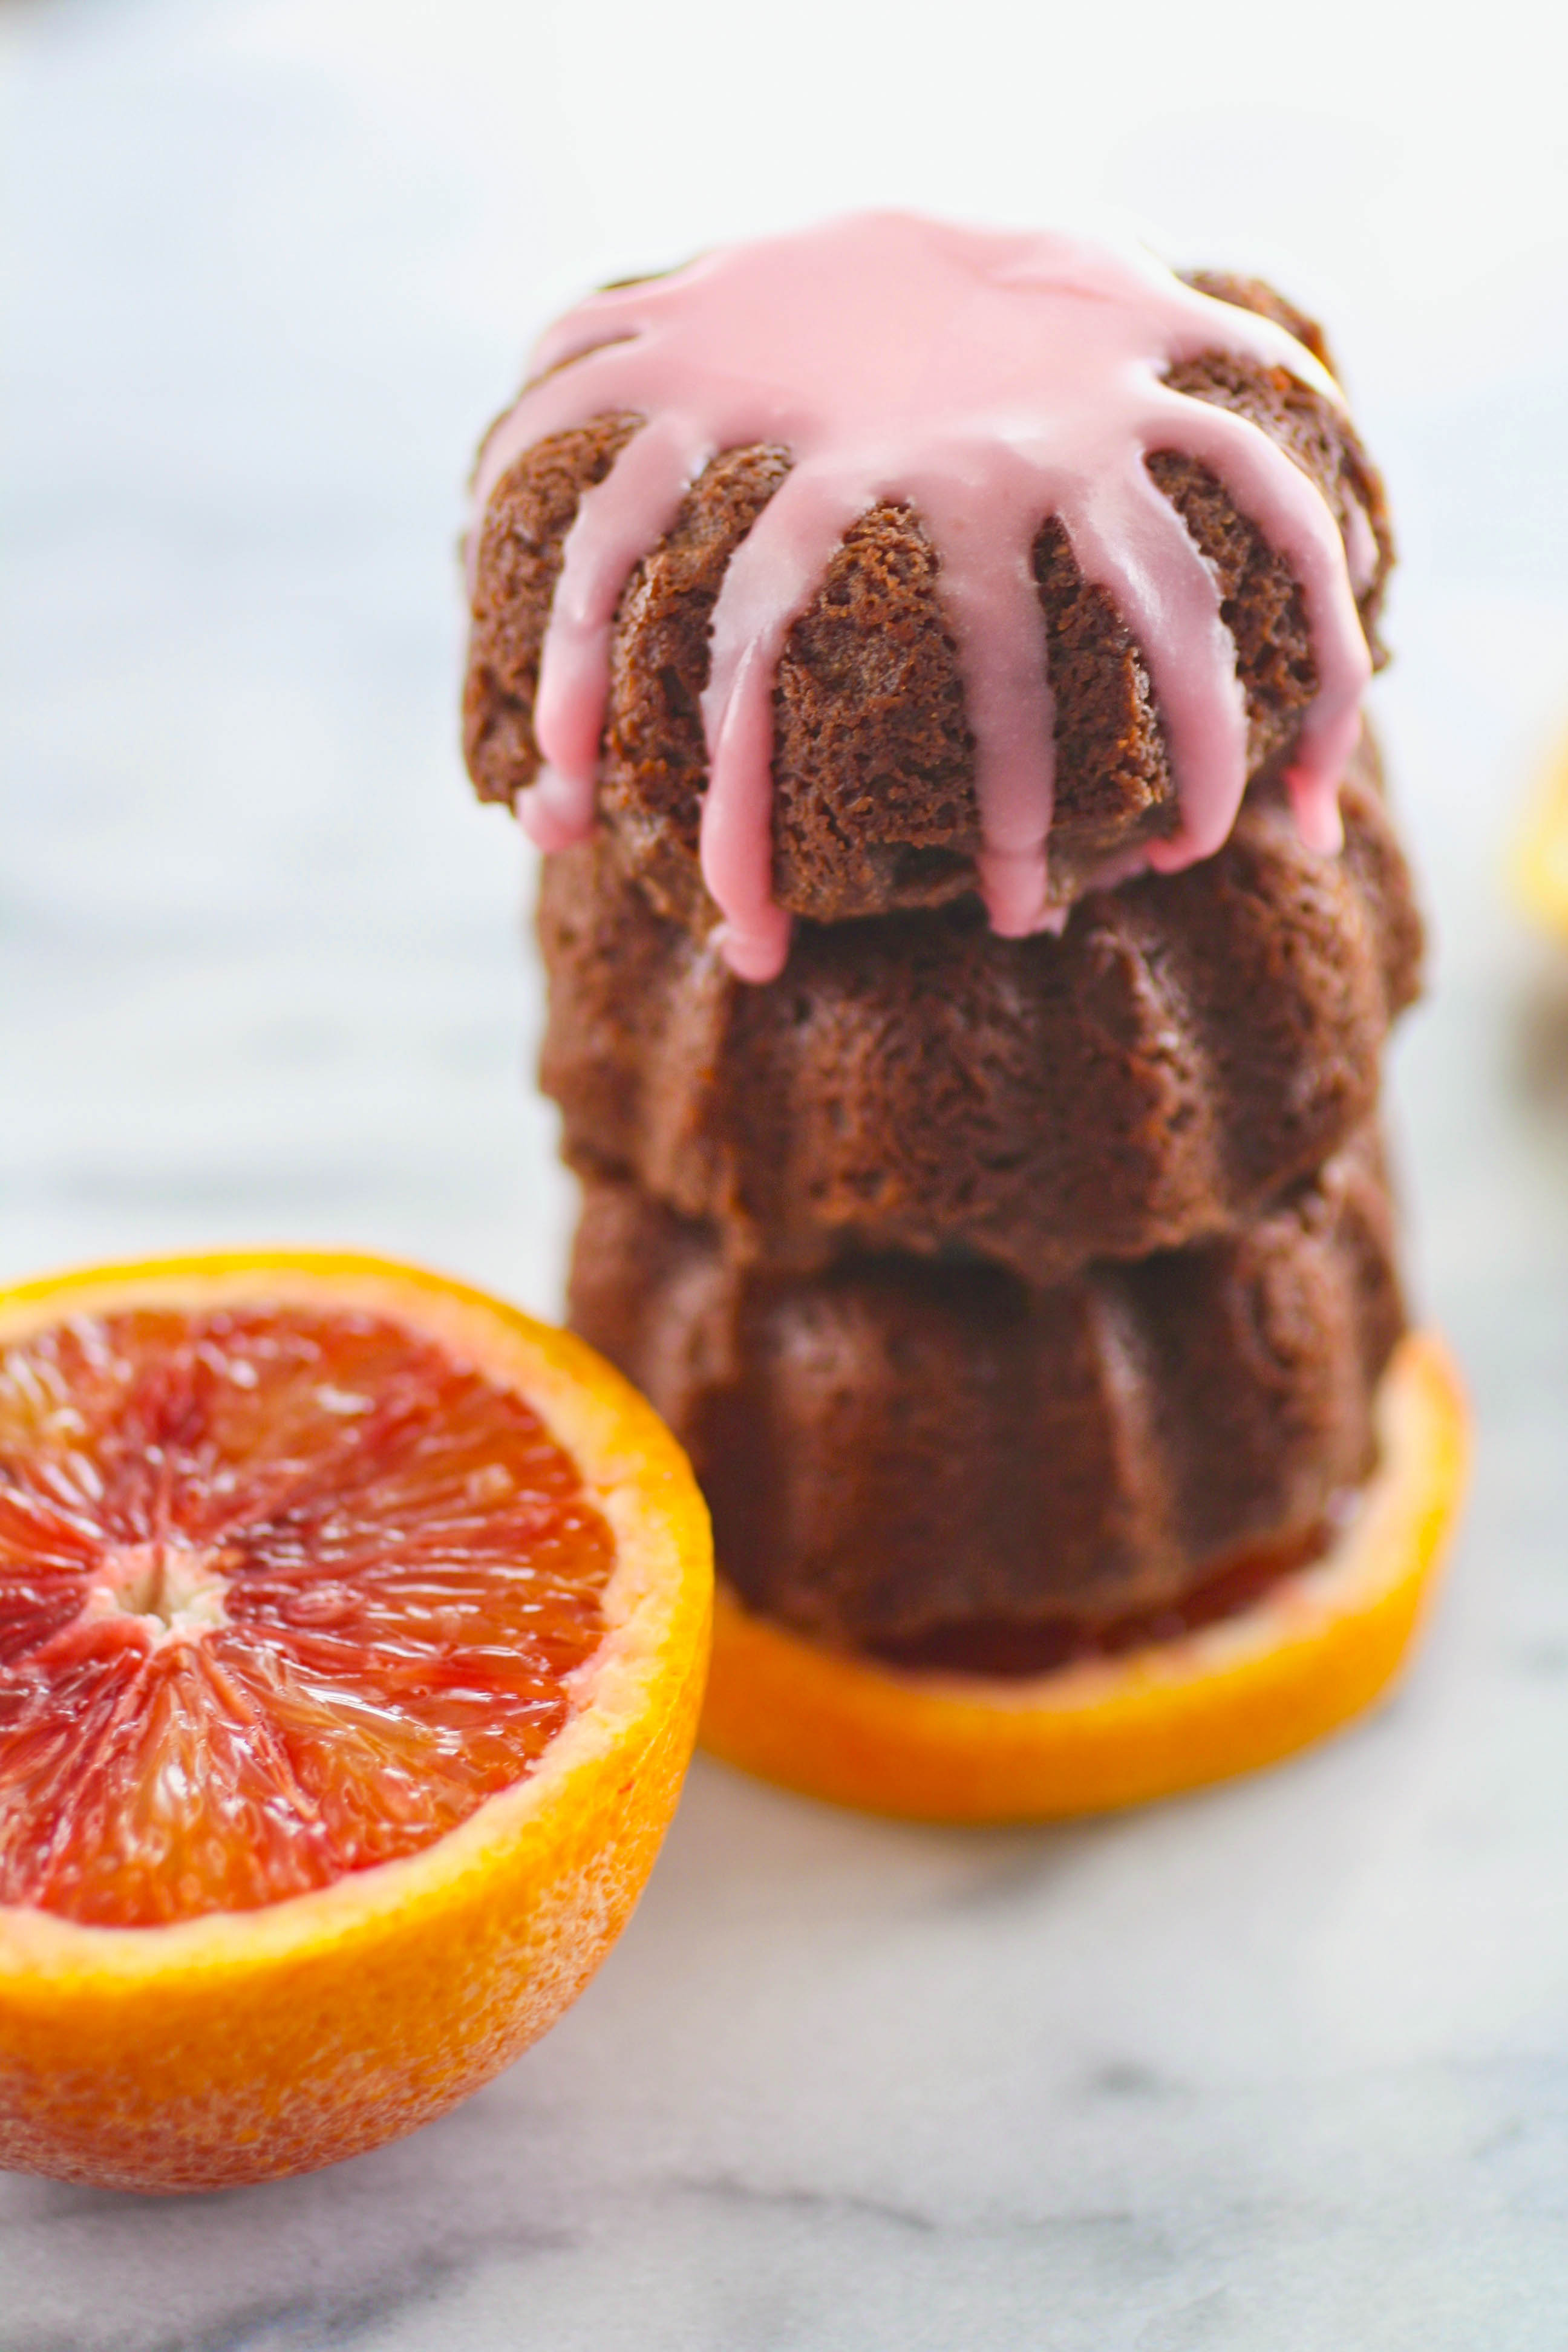 Mini Blood Orange Scented Chocolate-Ricotta Cakes are a lovely dessert. You'll love the blood orange flavor in these mini cakes.